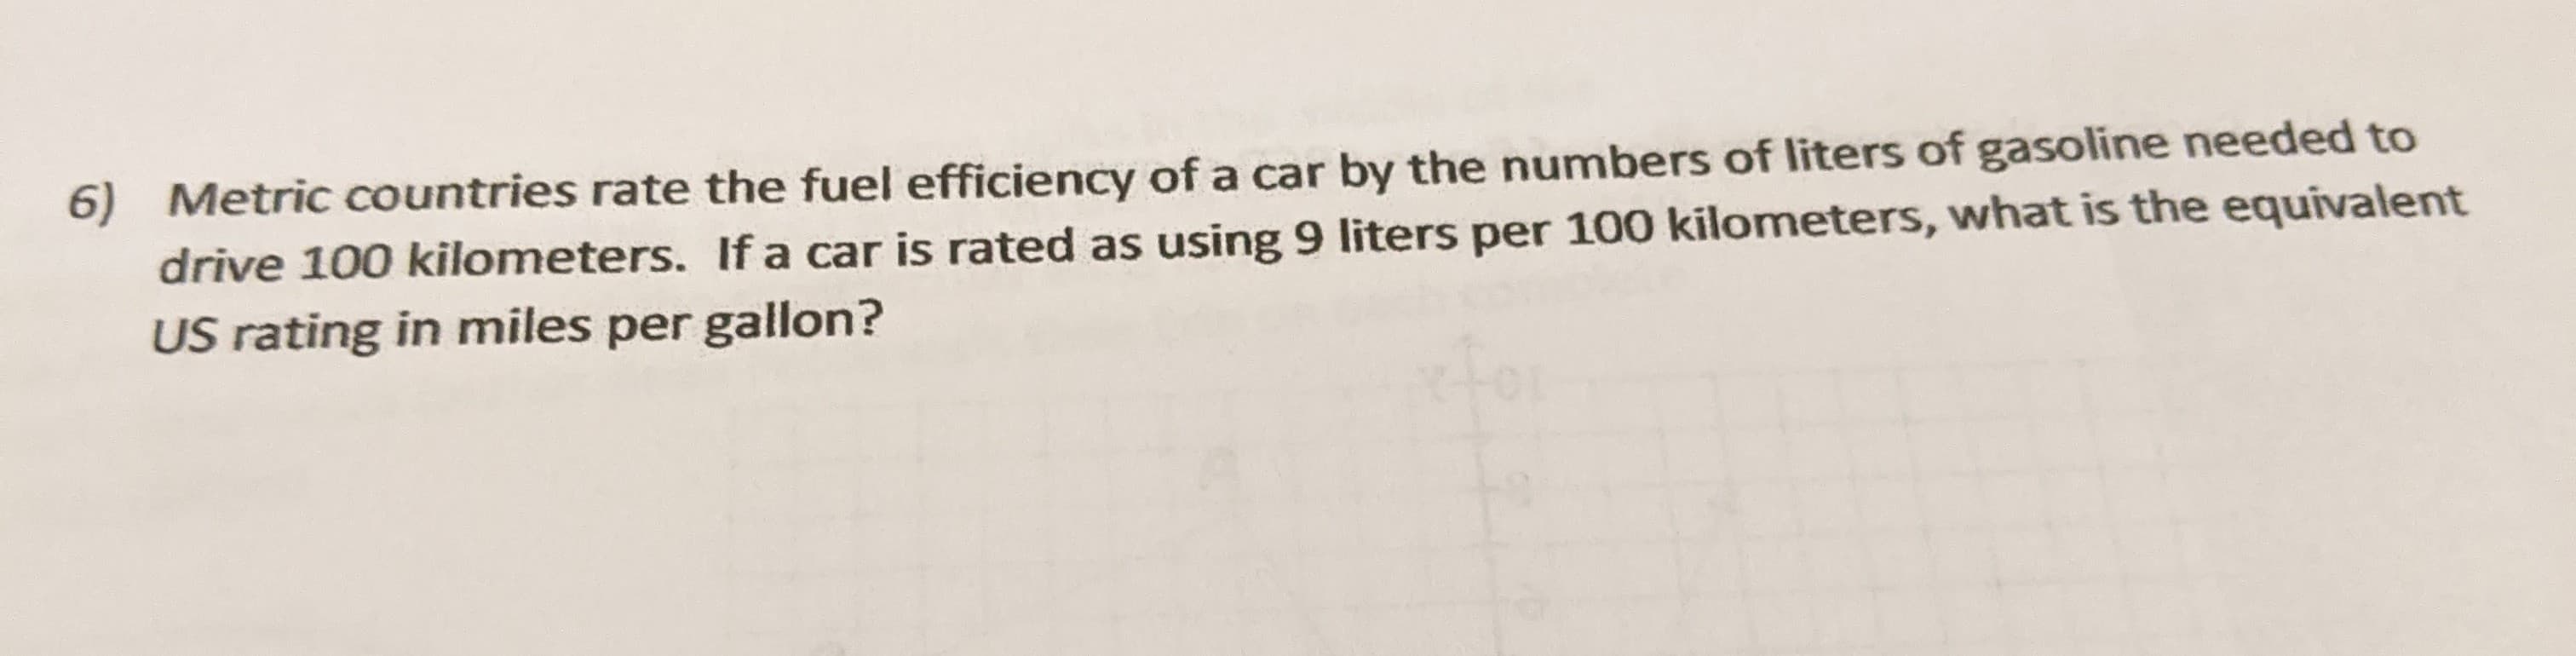 6) Metric countries rate the fuel efficiency of a car by the numbers of liters of gasoline needed to
drive 100 kilometers. If a car is rated as using 9 liters per 100 kilometers, what is the equivalent
US rating in miles per gallon?
